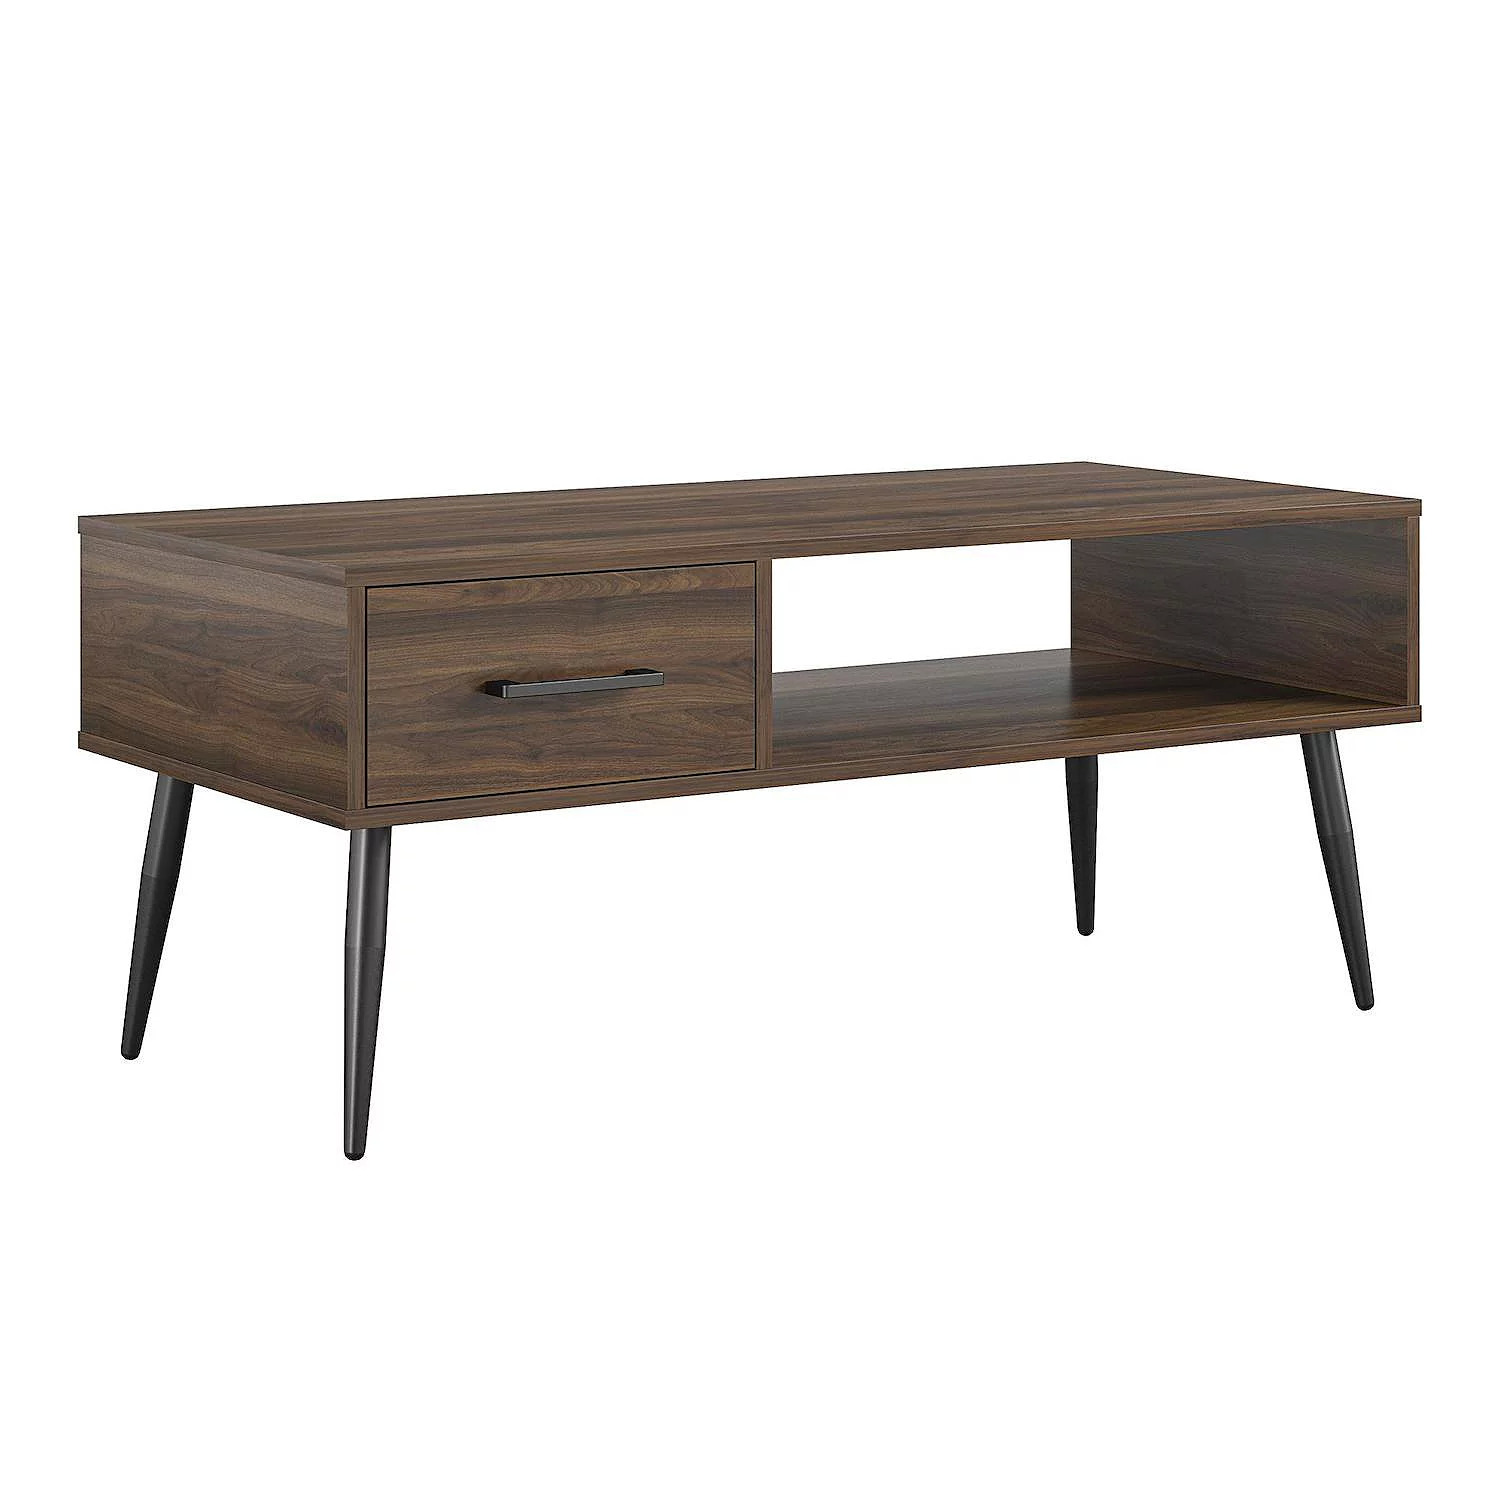 Ameriwood Home Phillips Coffee Table $48.39